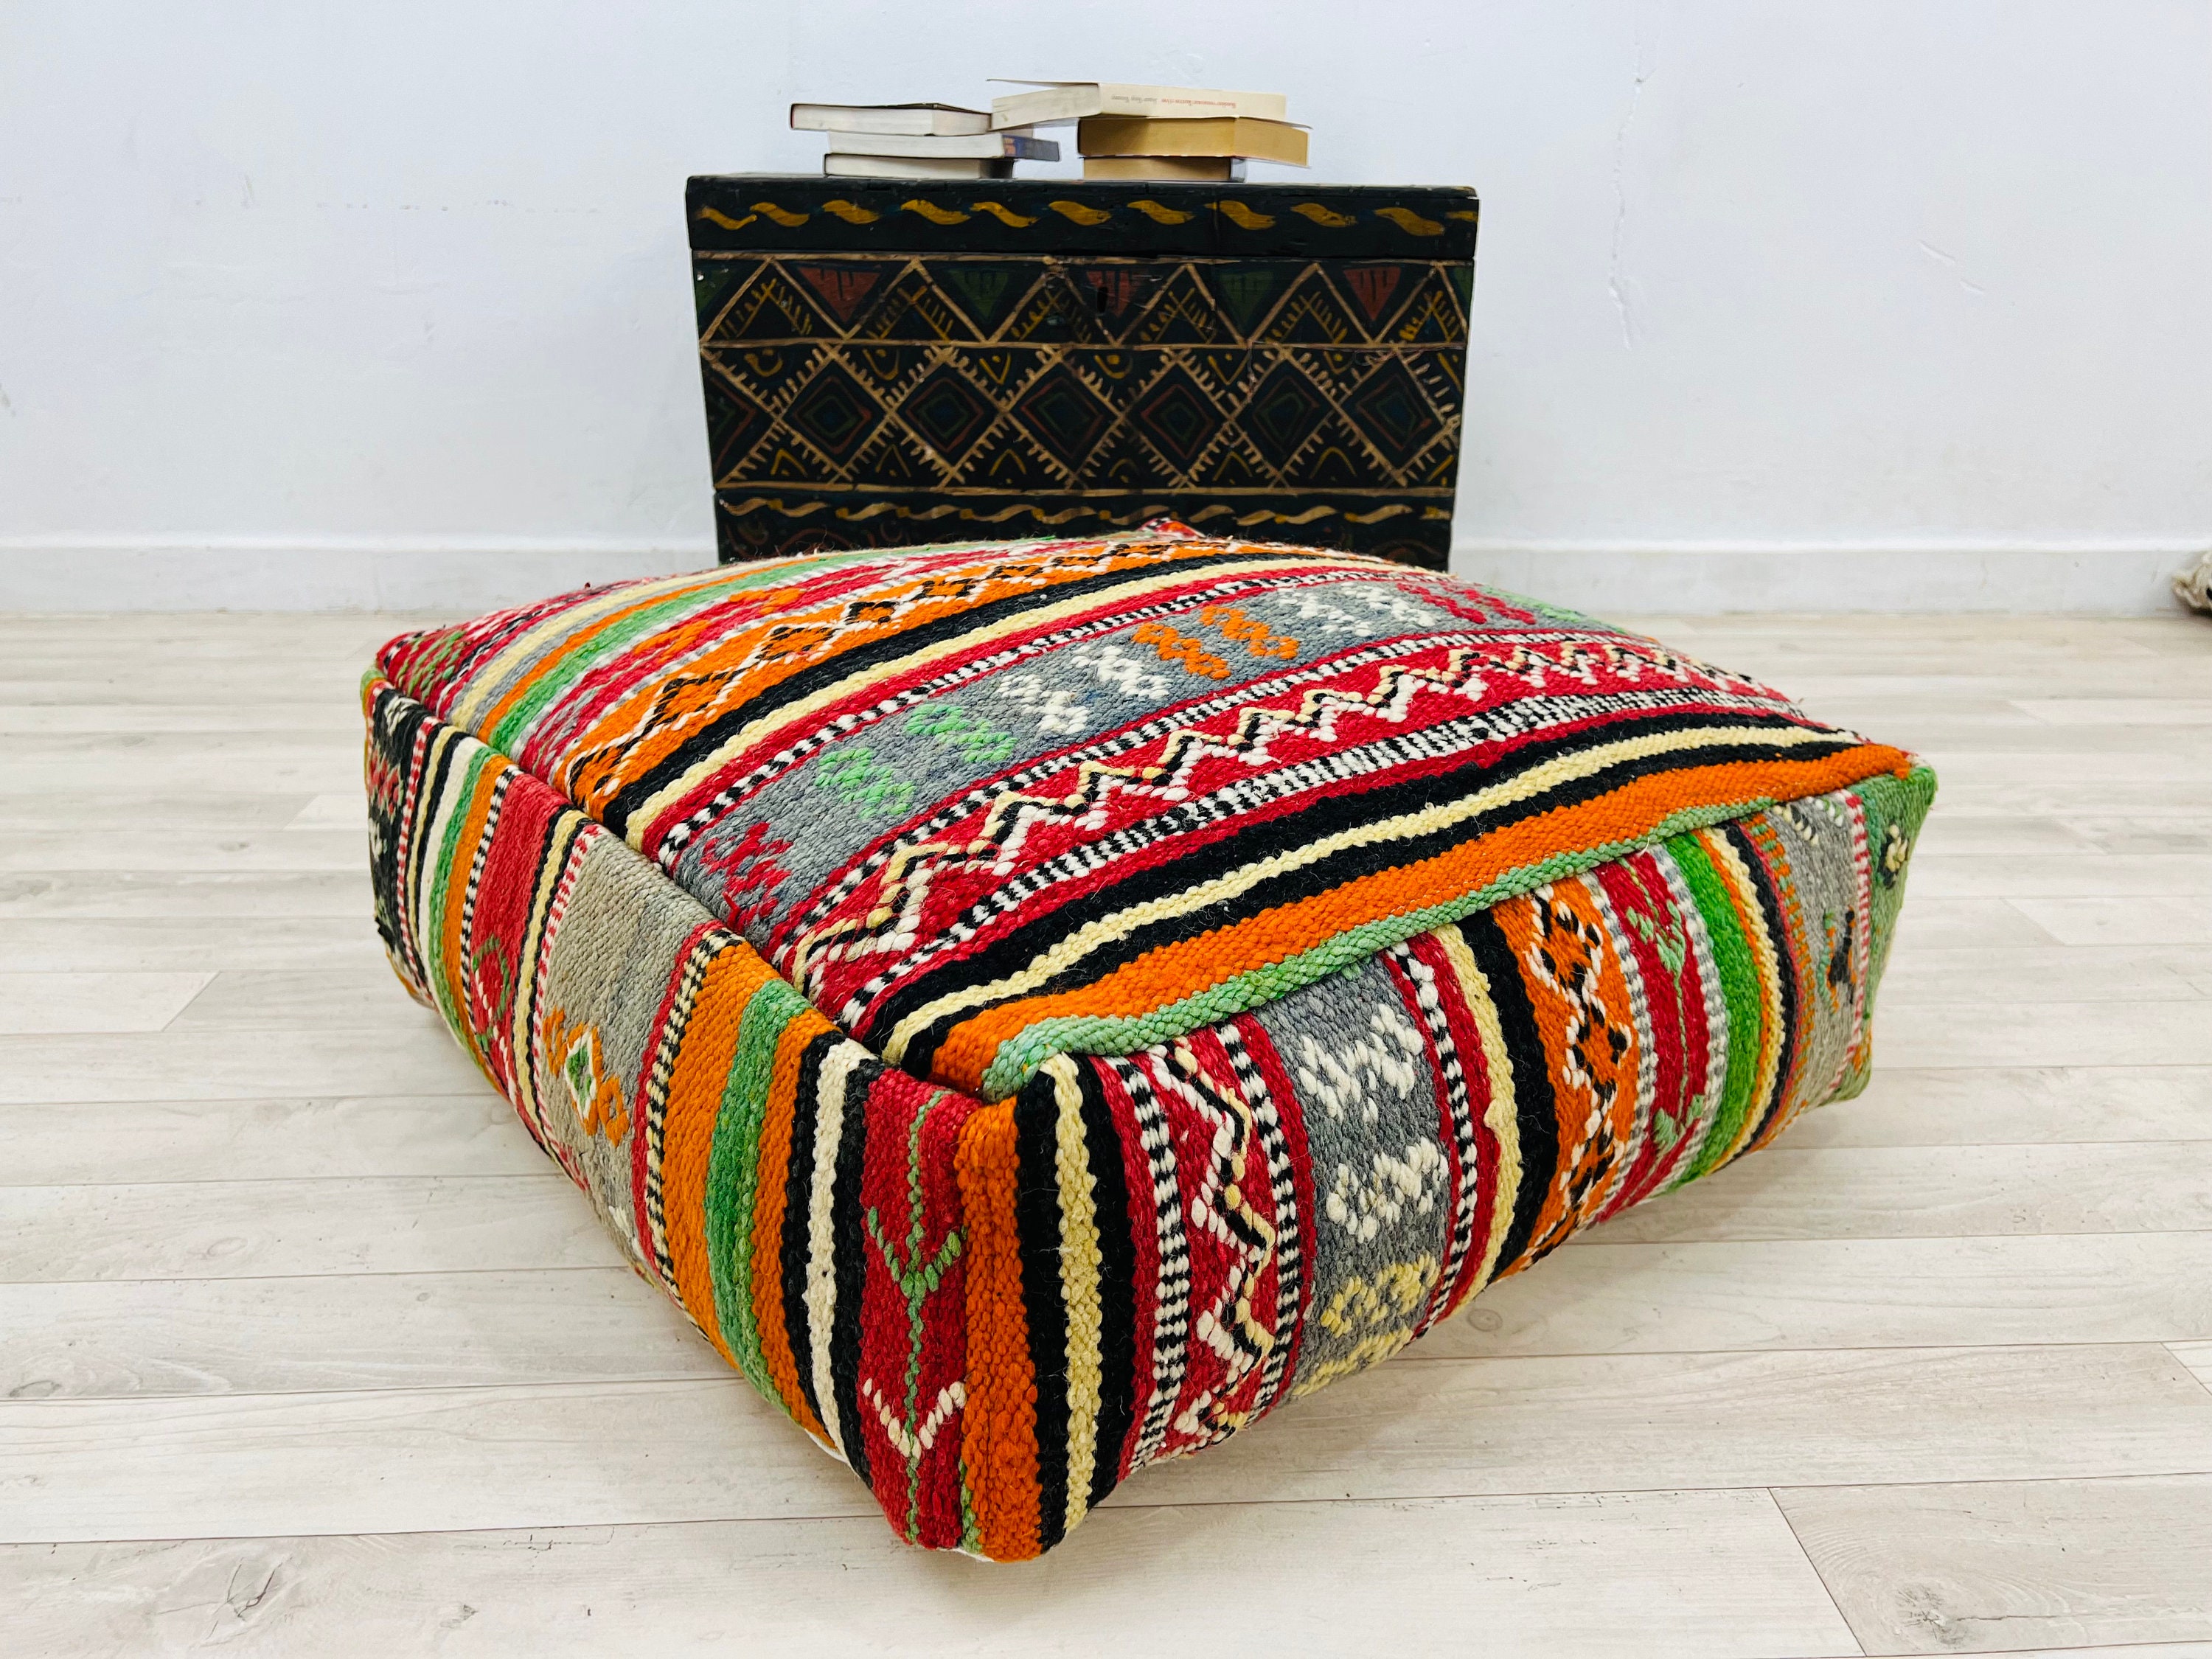 Free Gift Wrapping Vintage Floor Cushion Handmade Berber Pouf Ottoman Pillow 24 8